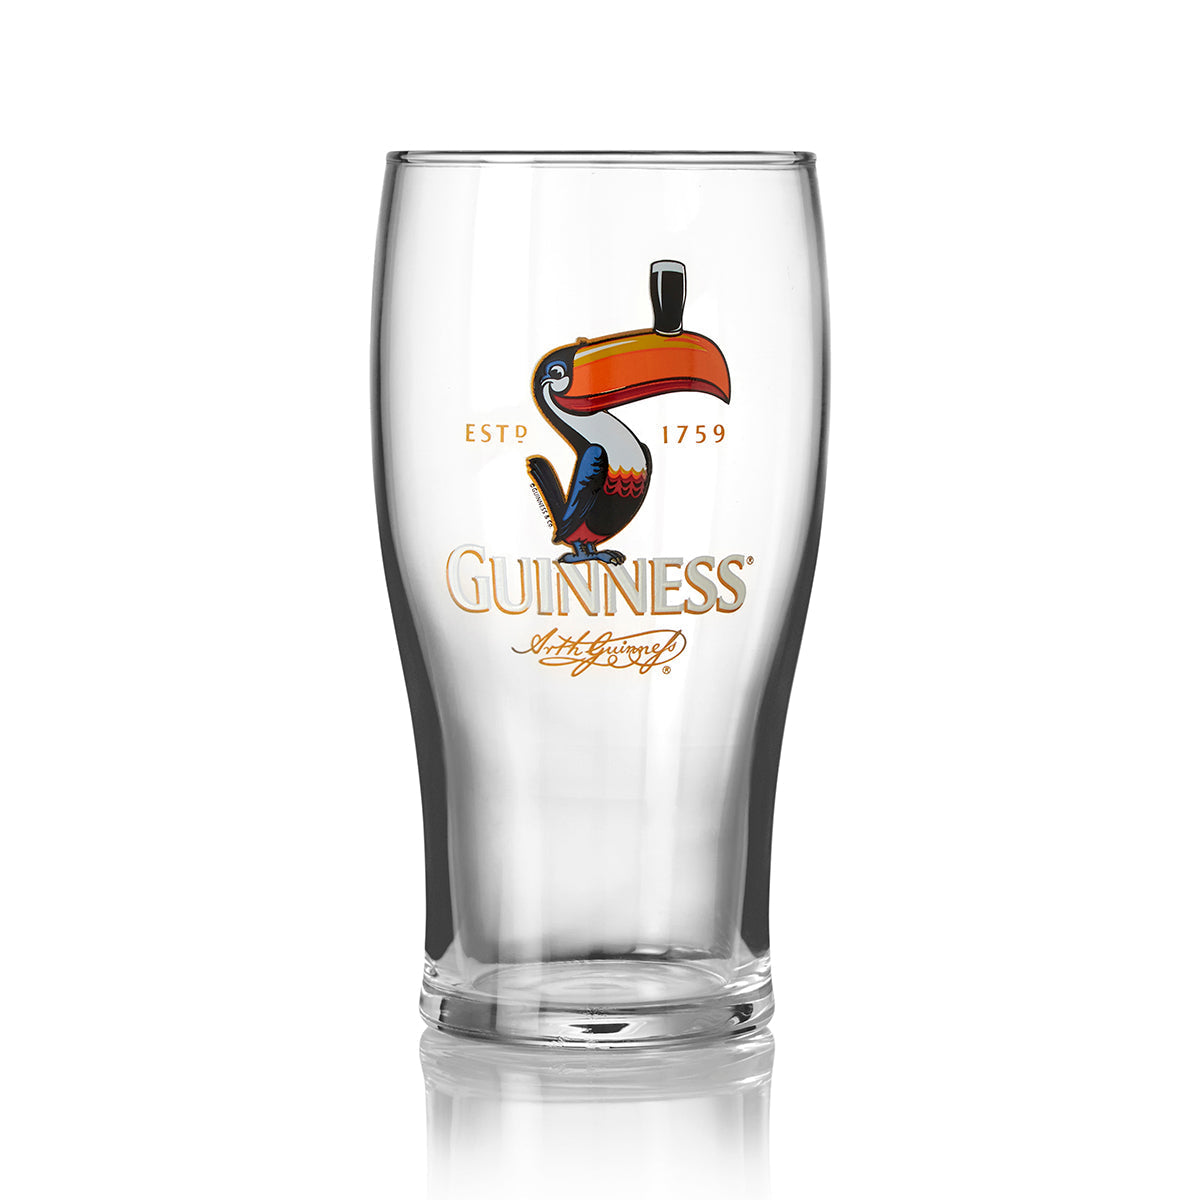 Iconic Guinness Toucan Pint Glass - 12 Pack featuring the iconic Guinness logo and toucan design by Guinness UK.